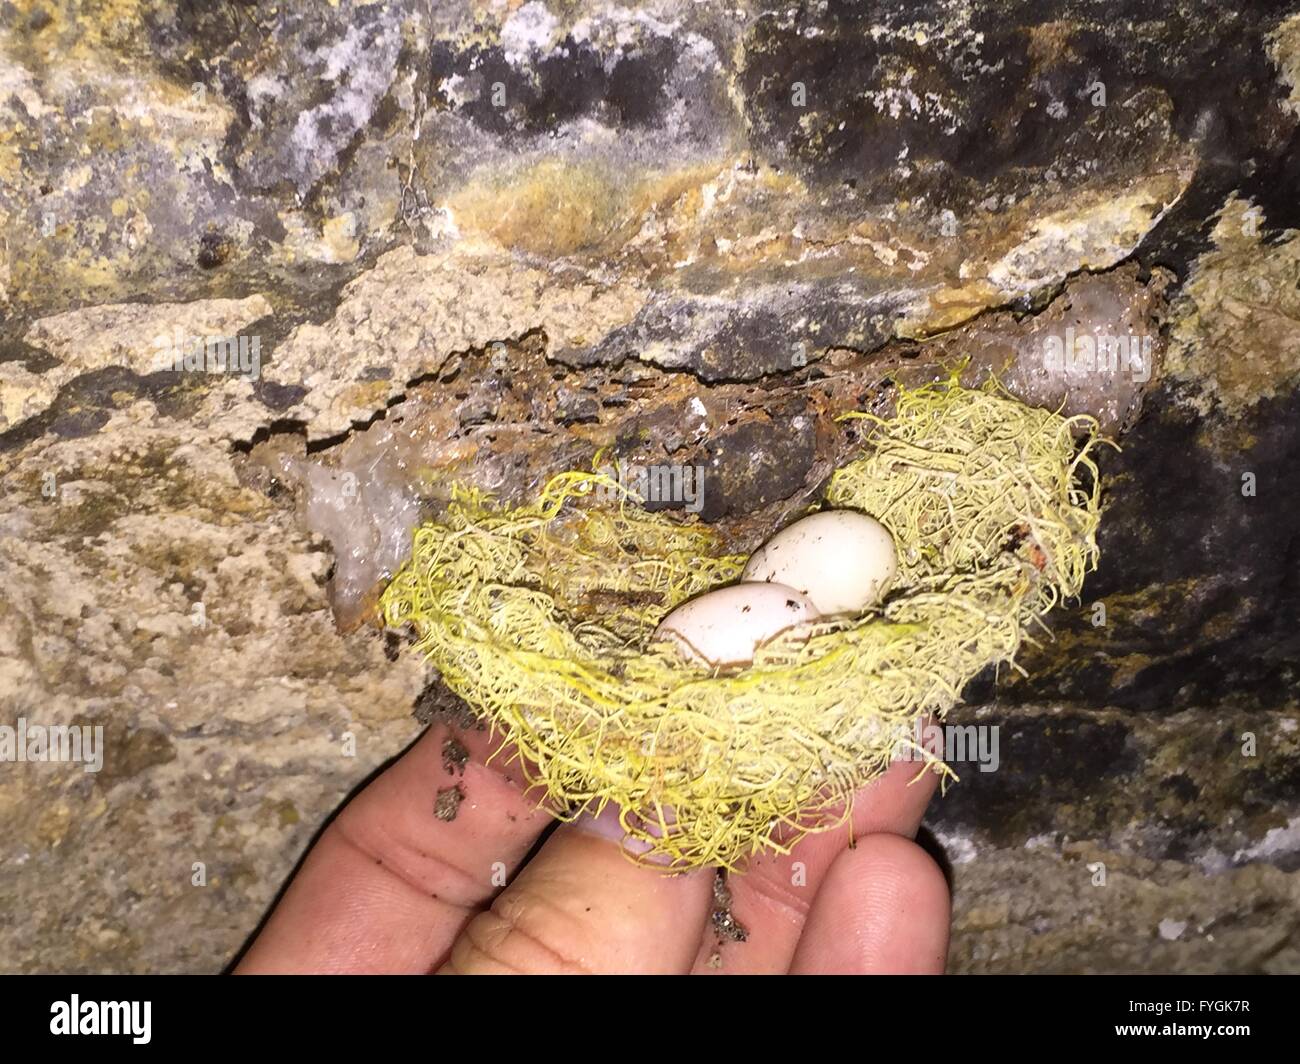 Swiftlet Stock Photos &amp; Swiftlet Stock Images - Alamy